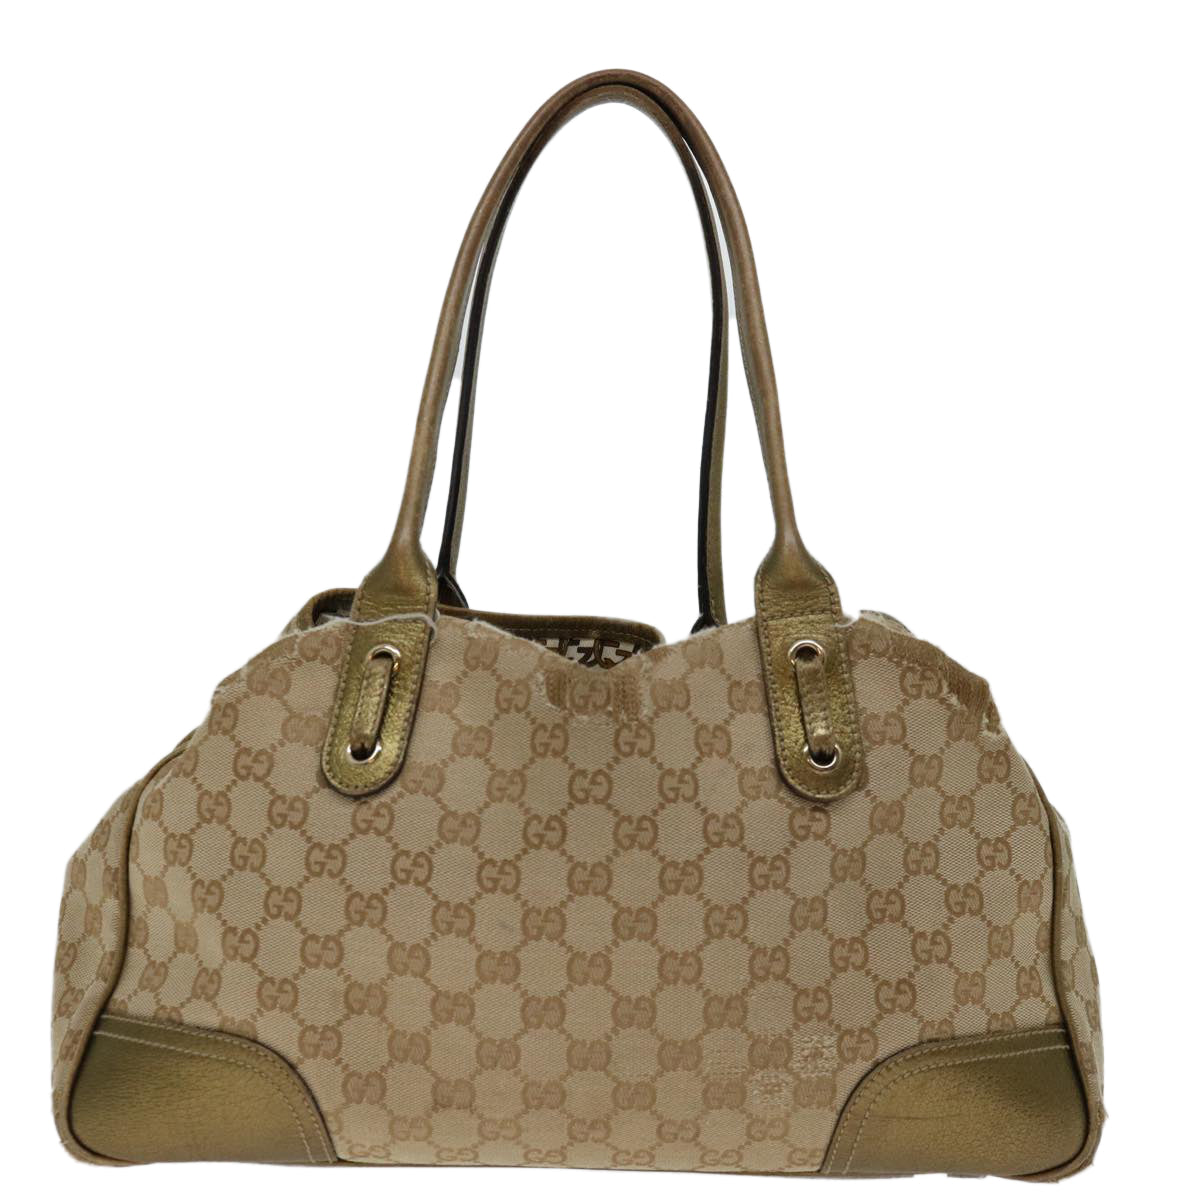 GUCCI GG Canvas Tote Bag Beige Gold 163805 Auth 69641 - 0